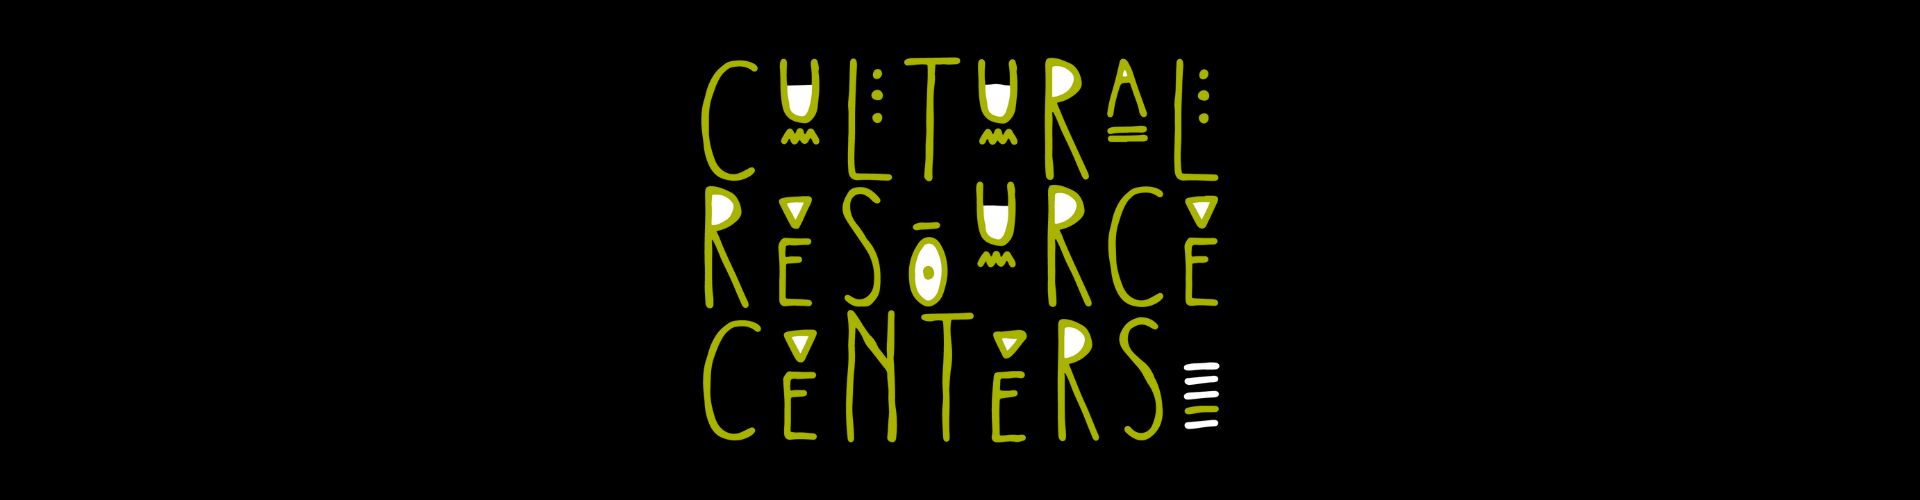 "Cultural Resource Centers" logo in green against a black background